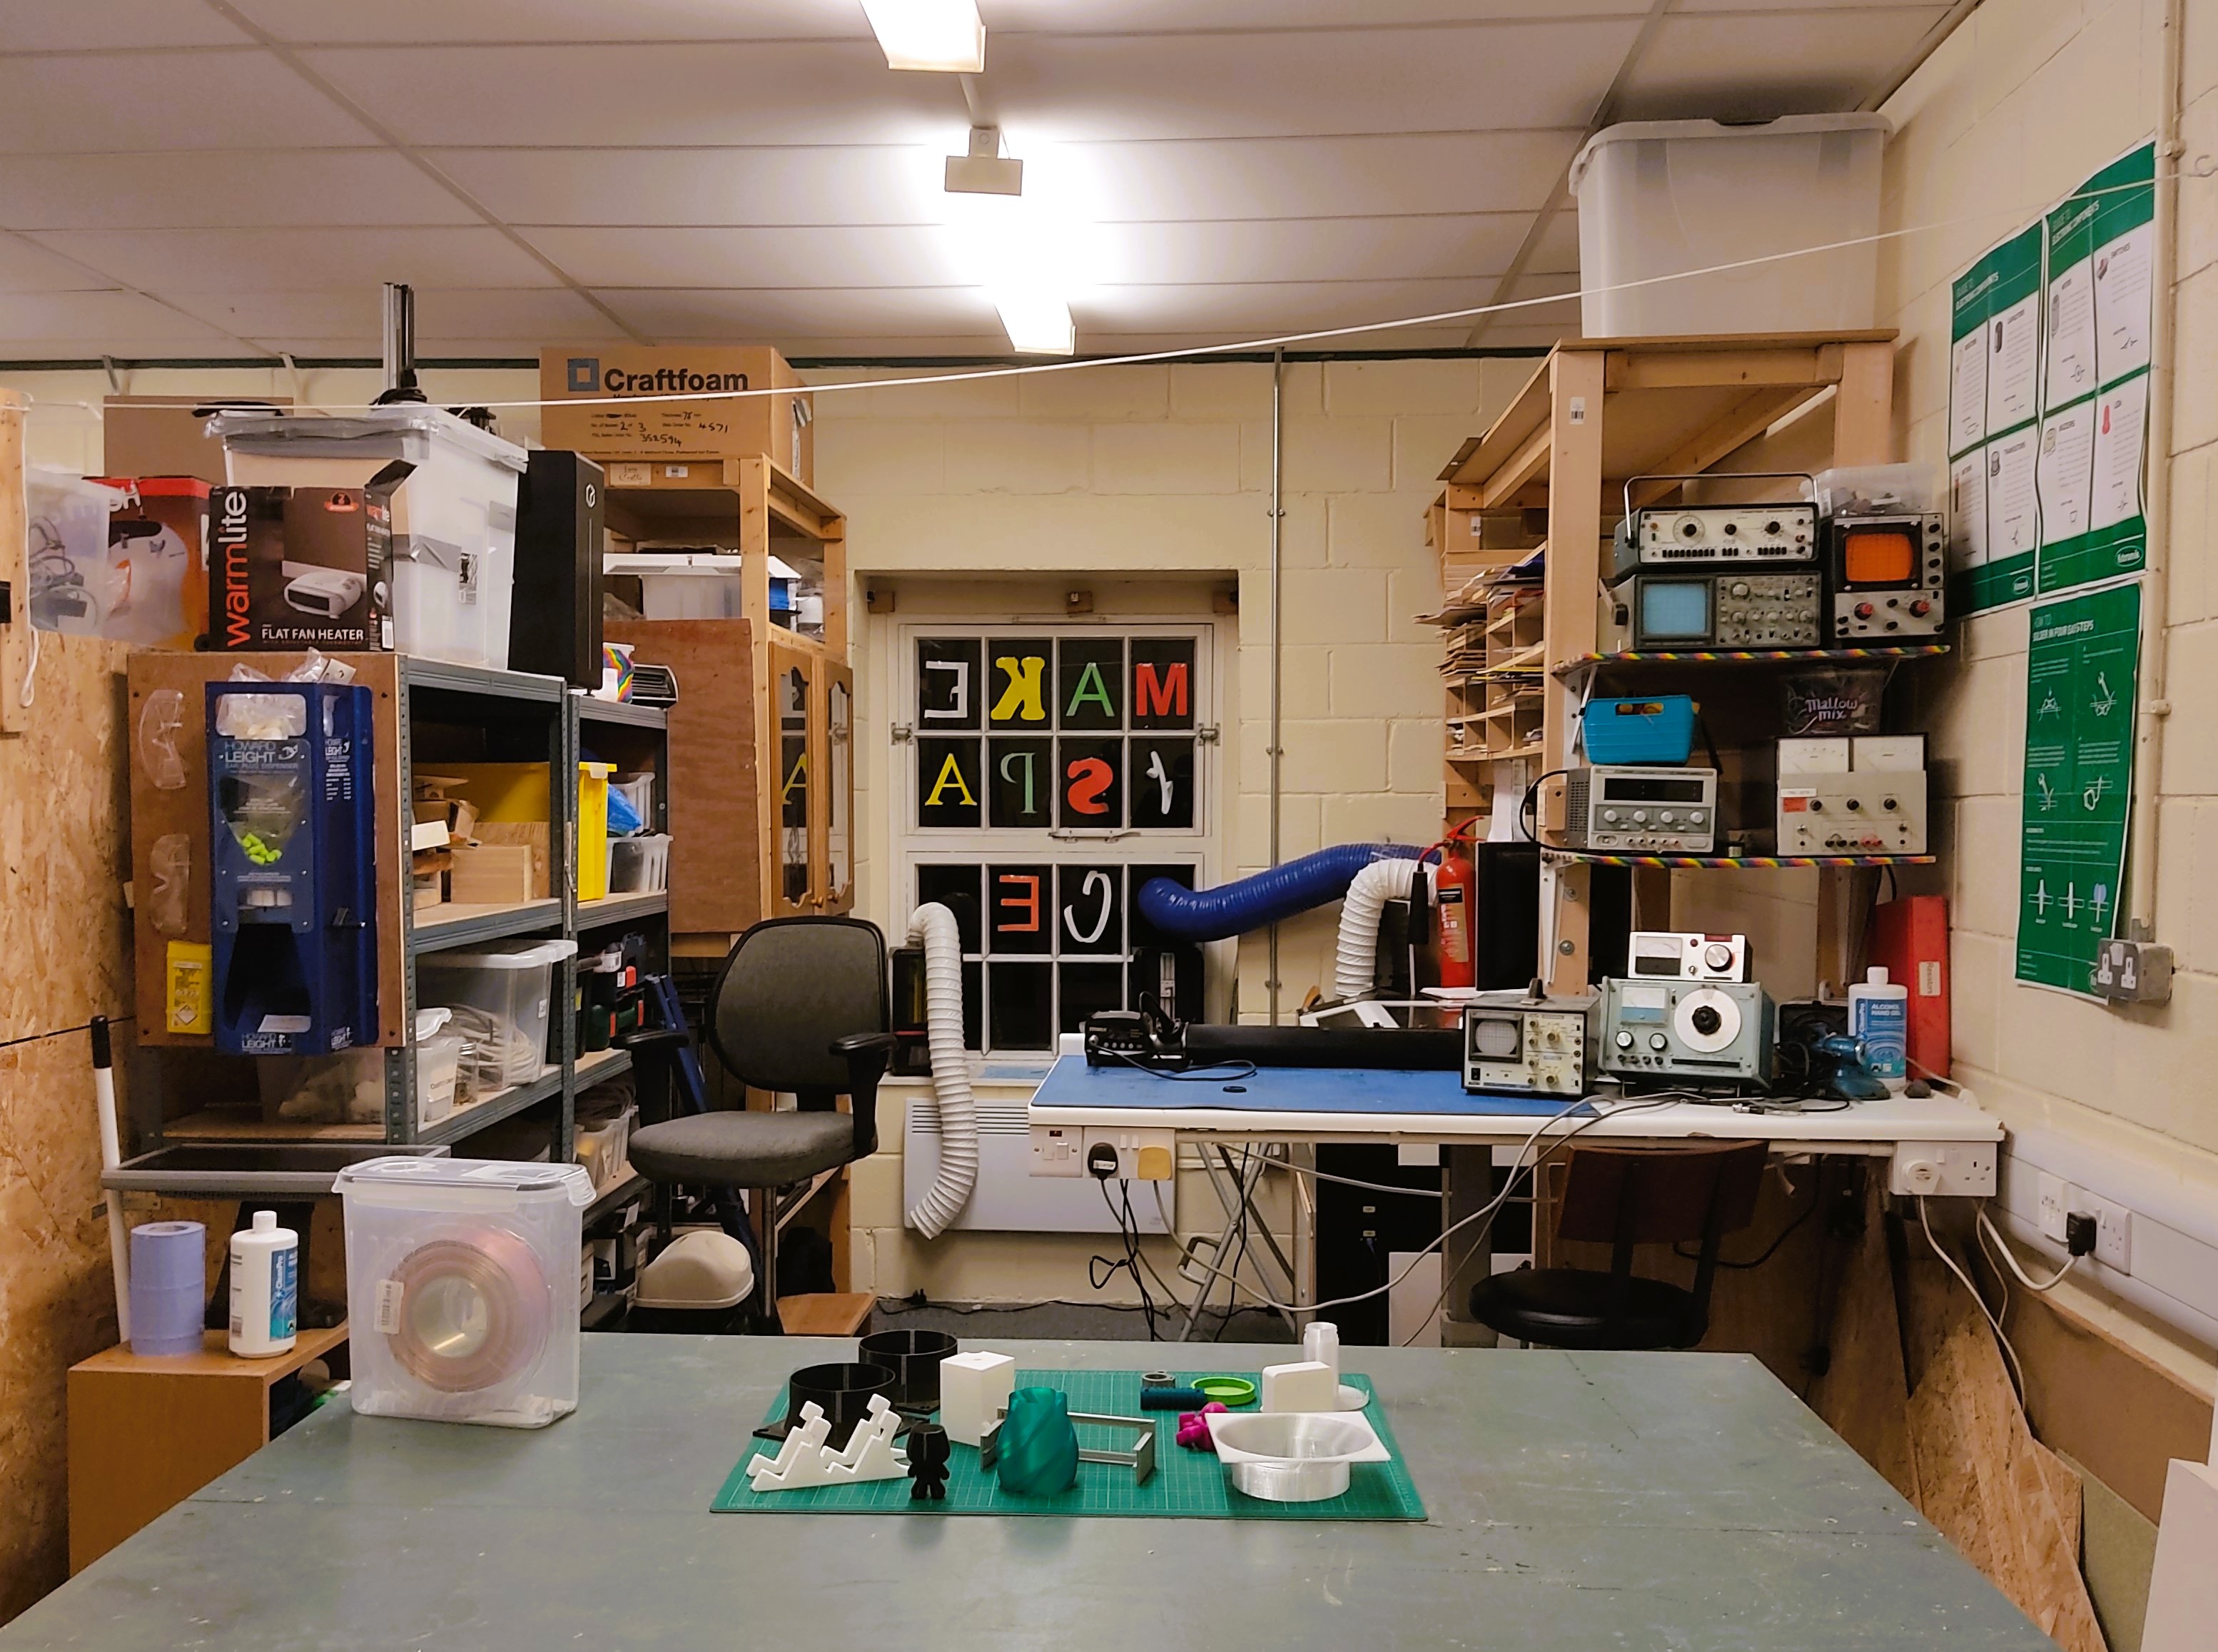 3D Printing and Laser Cutting